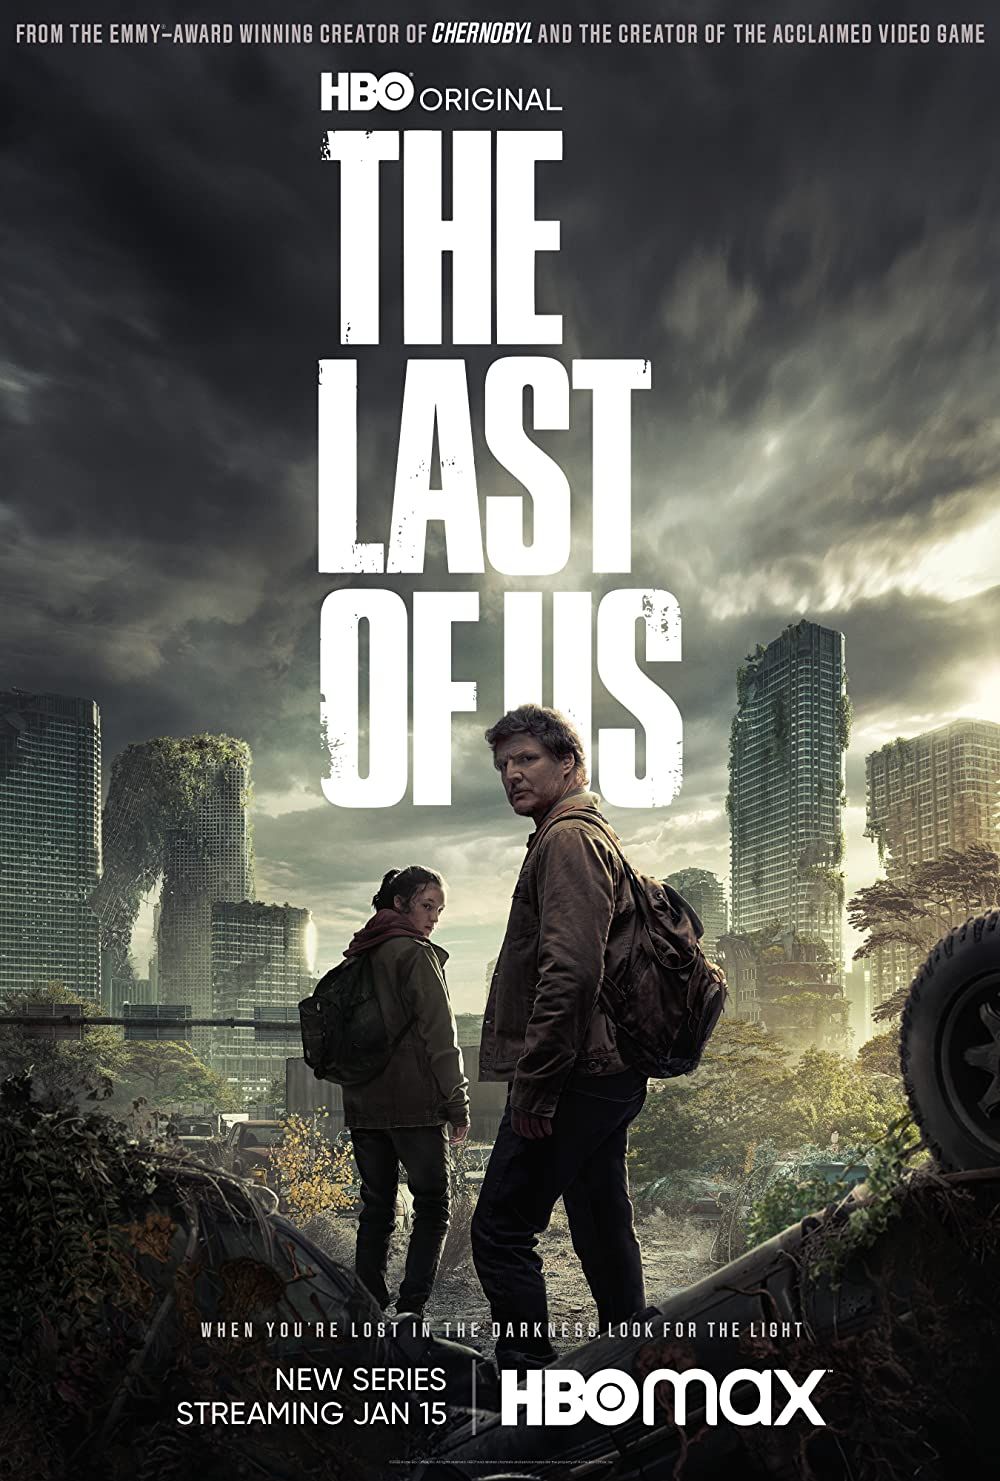 It's official. #TheLastofUsHBO Casts Abby. Who do you think got the role of  Abby in The Last of Us Season 2?